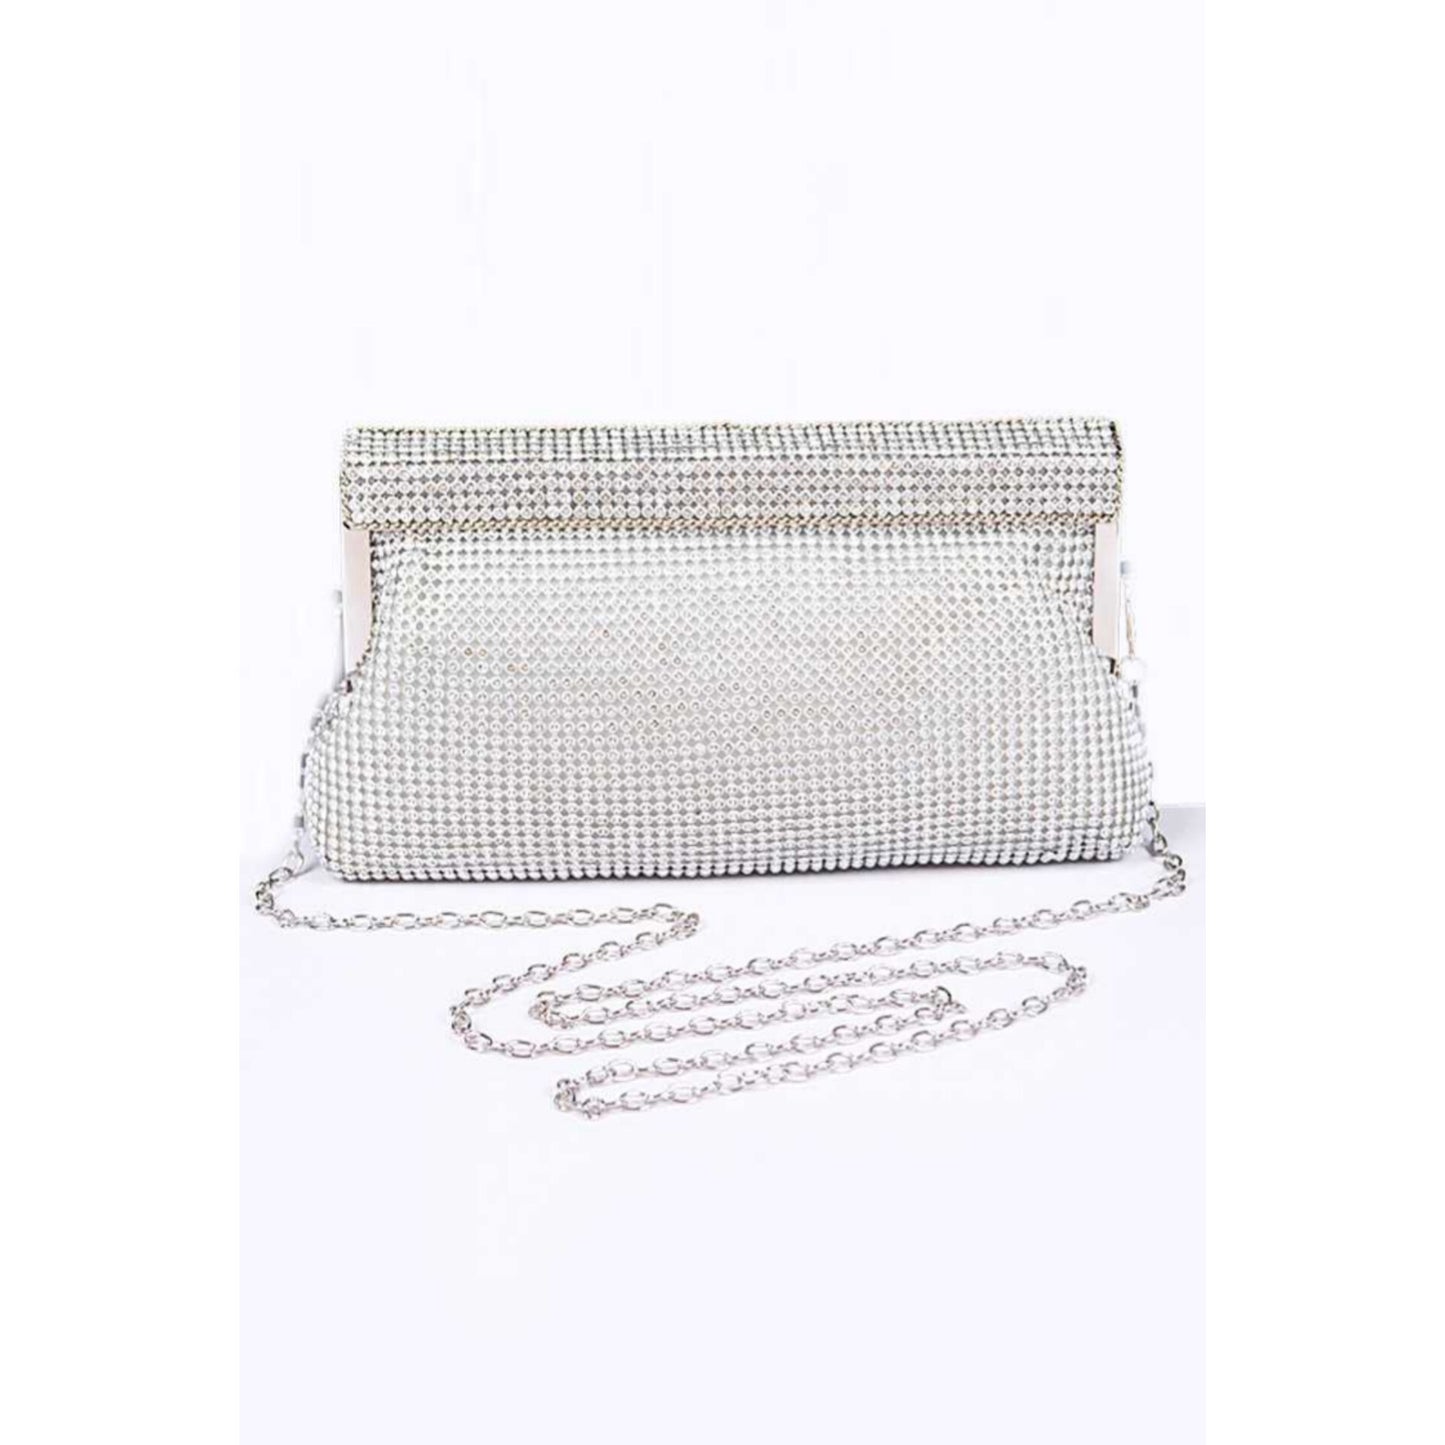 Glam Nights Out Clutch